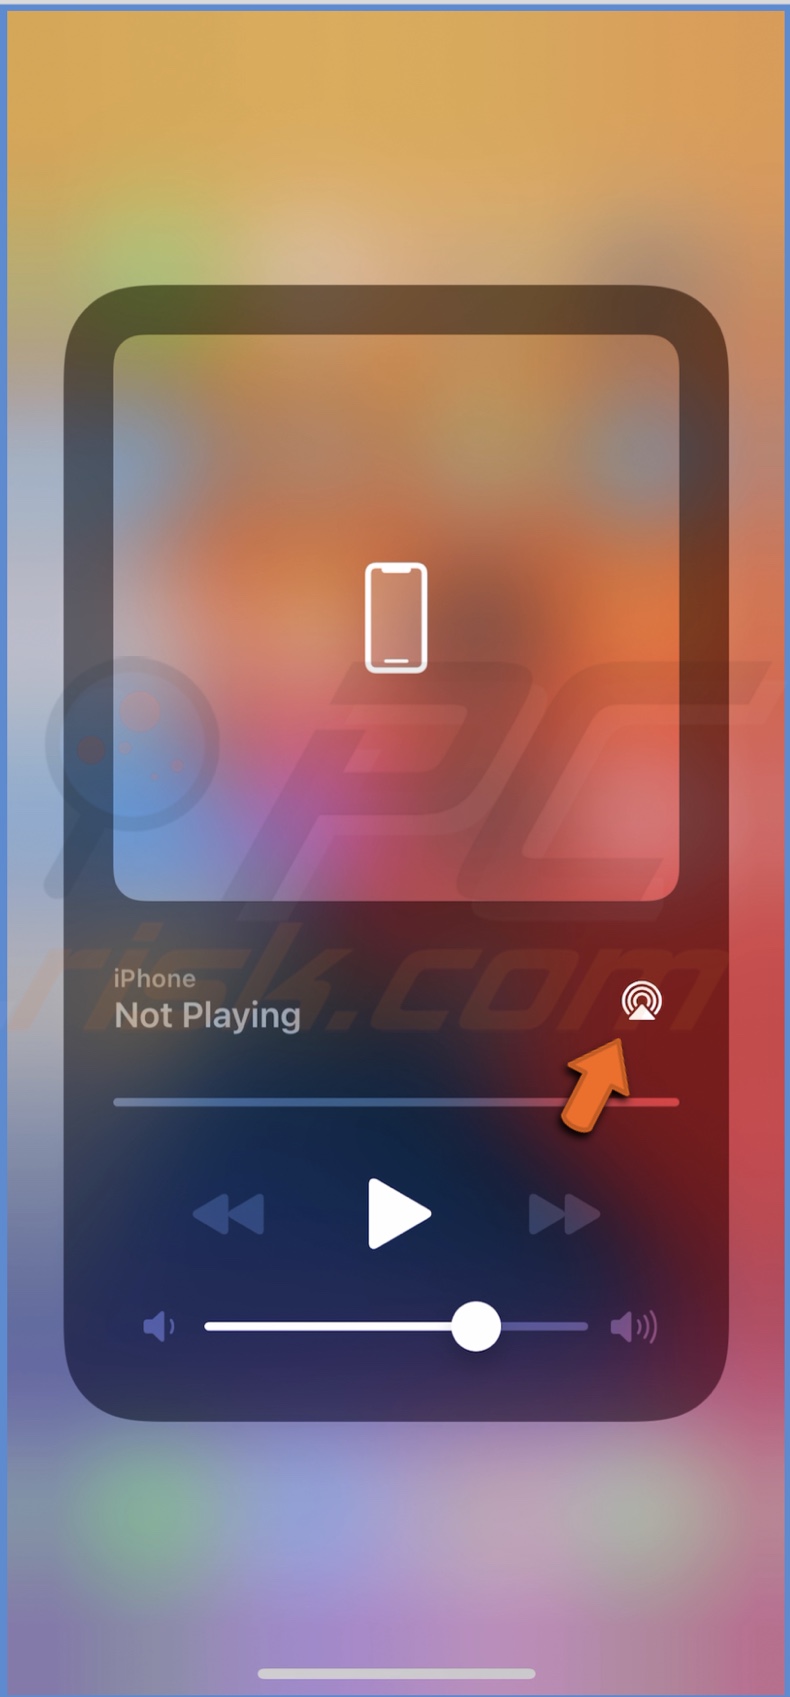 Tap on the AirPlay icon